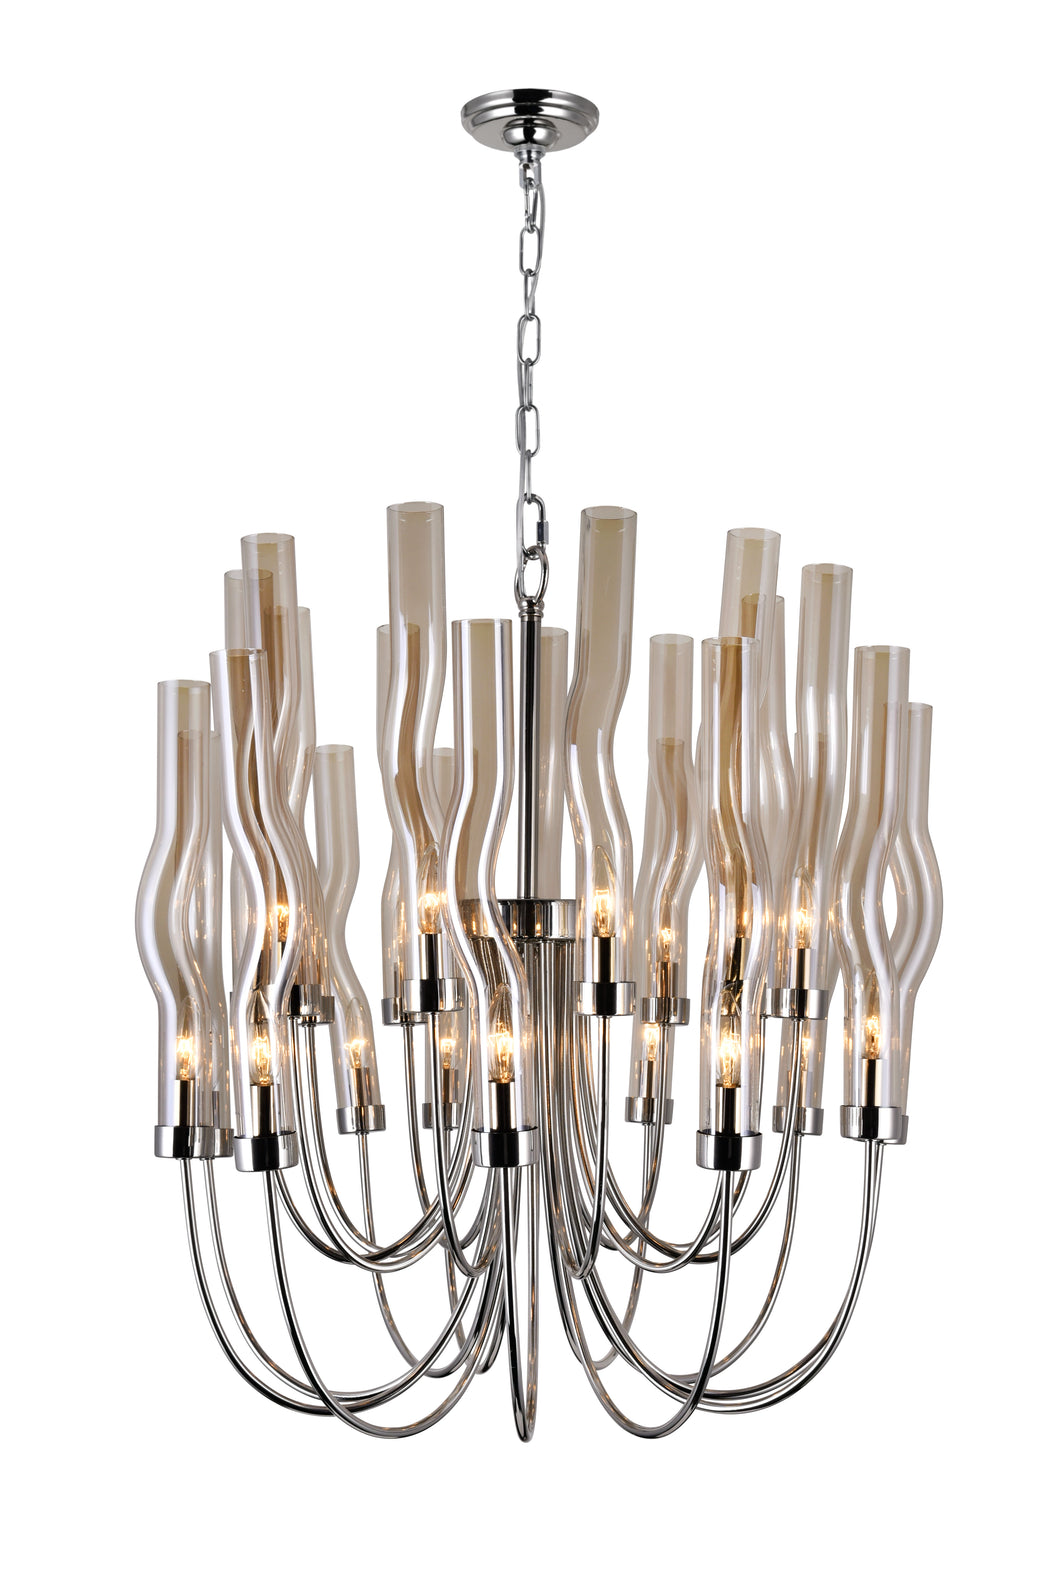 22 Light Chandelier with Polished Nickel Finish